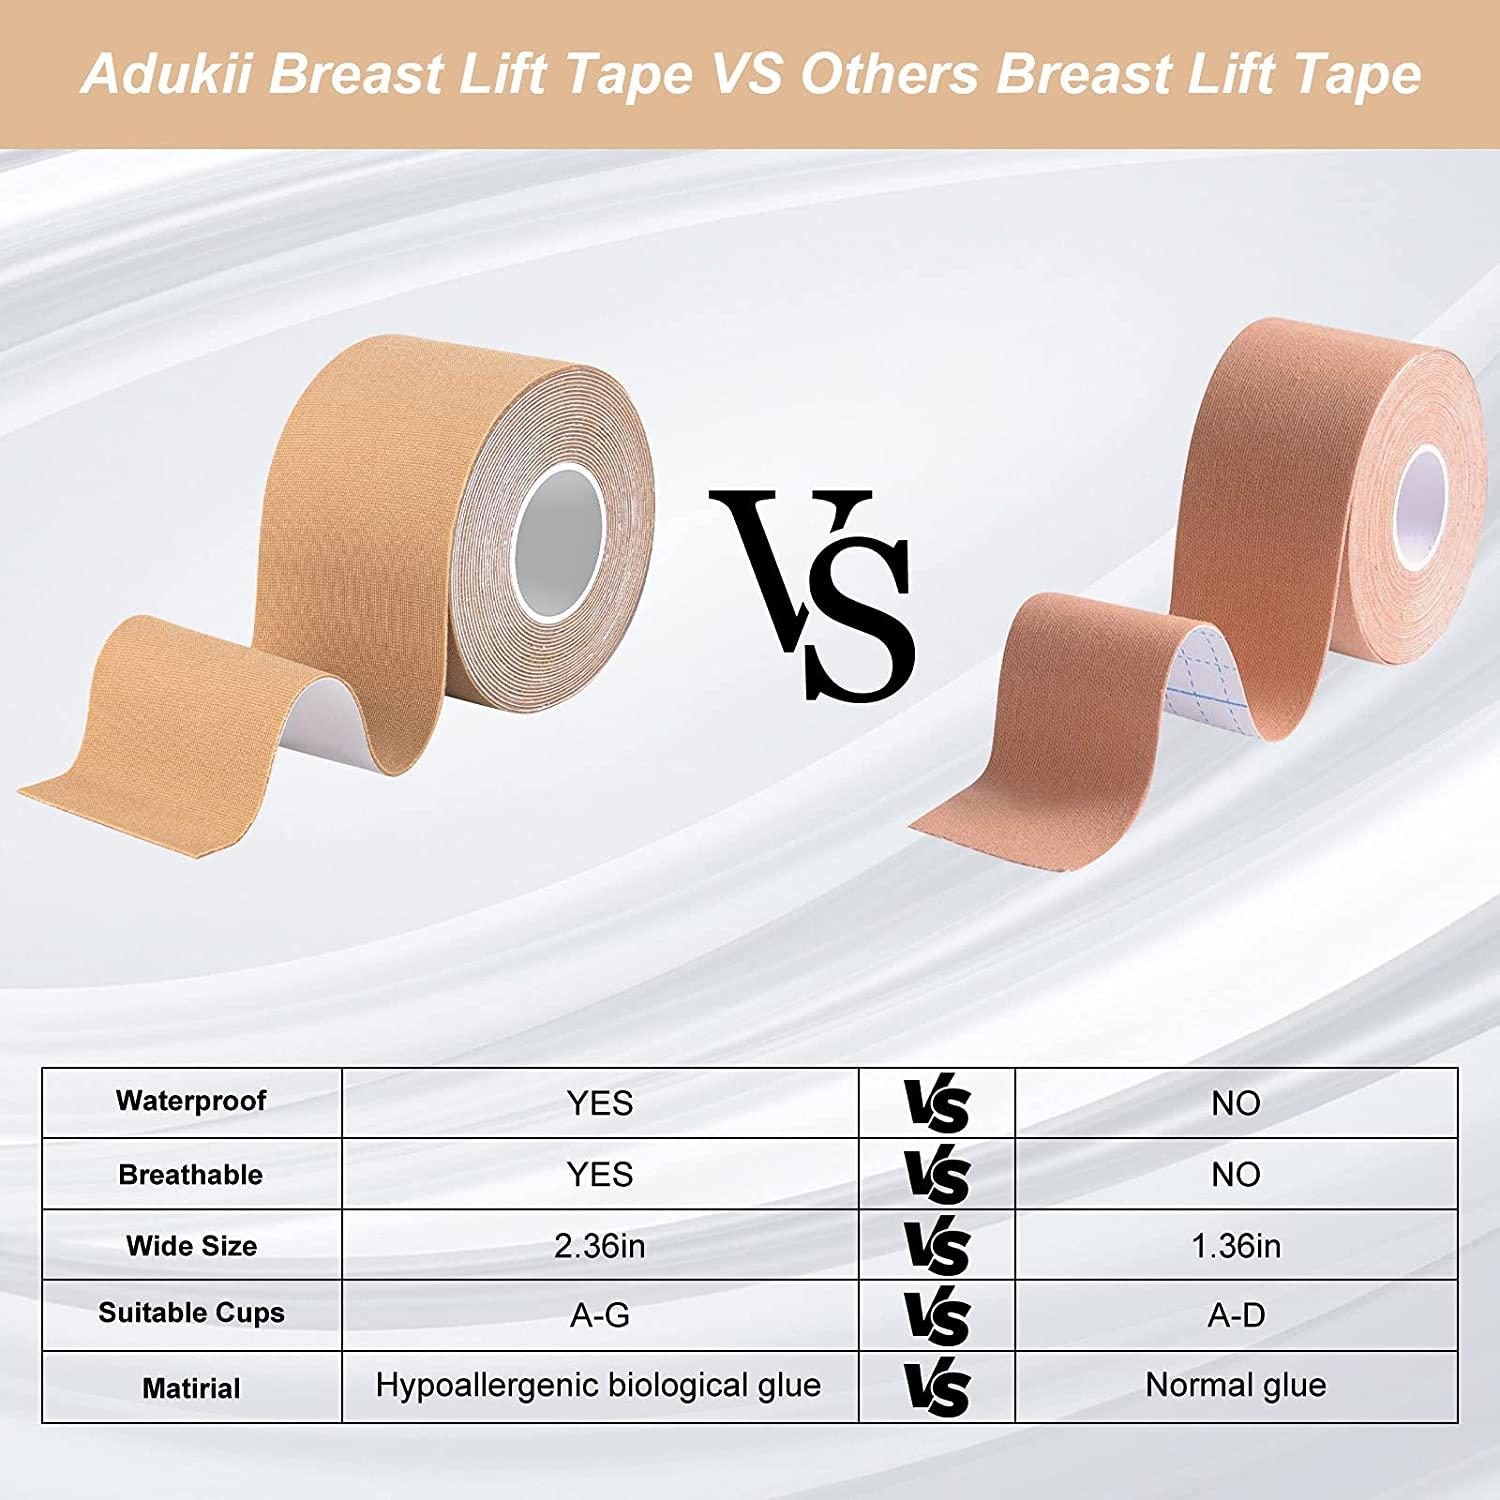 Boobytape for Breast Lift, Adukii Breast Tape With 2 PCS Nipple Covers & 36  PCS Fearless Tape, Bob Tape for Breast Lift Bare Lift Large Breasts  Friendly Push Up Strong Support Flesh